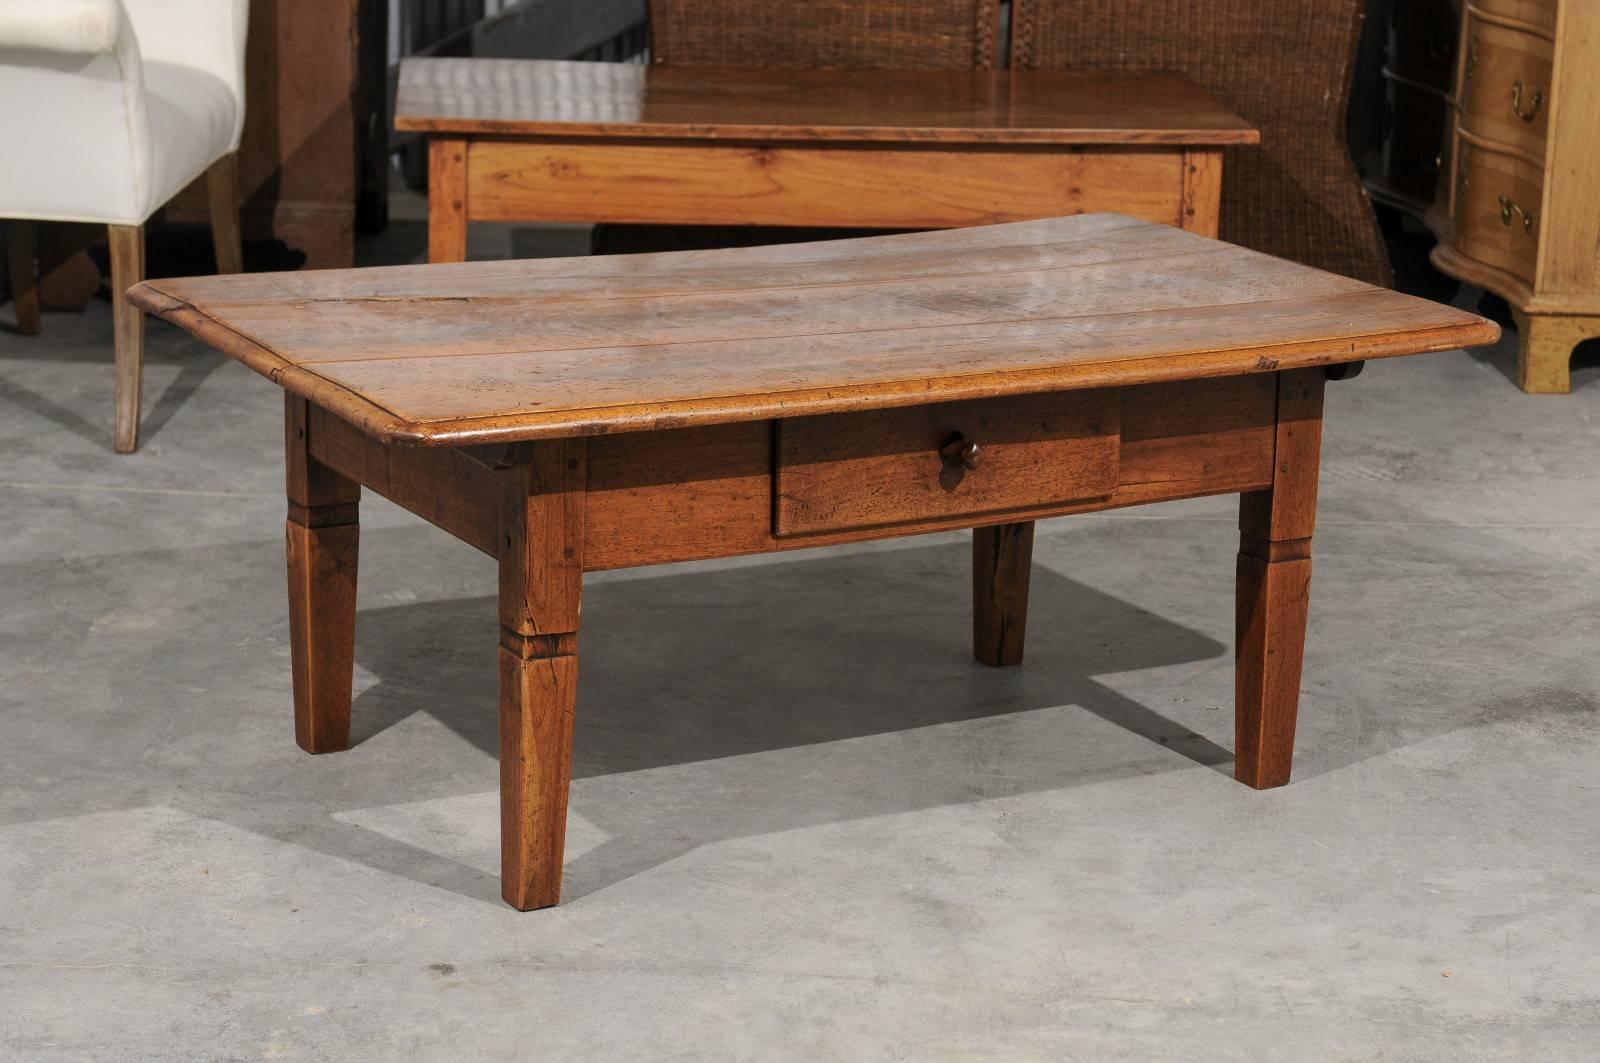 A French walnut (or cherry) coffee table with single drawer from the second half of the 19th century. This French wooden coffee table features a three-plank rectangular top with rounded edges and small chamfered corners. This simple top is raised on